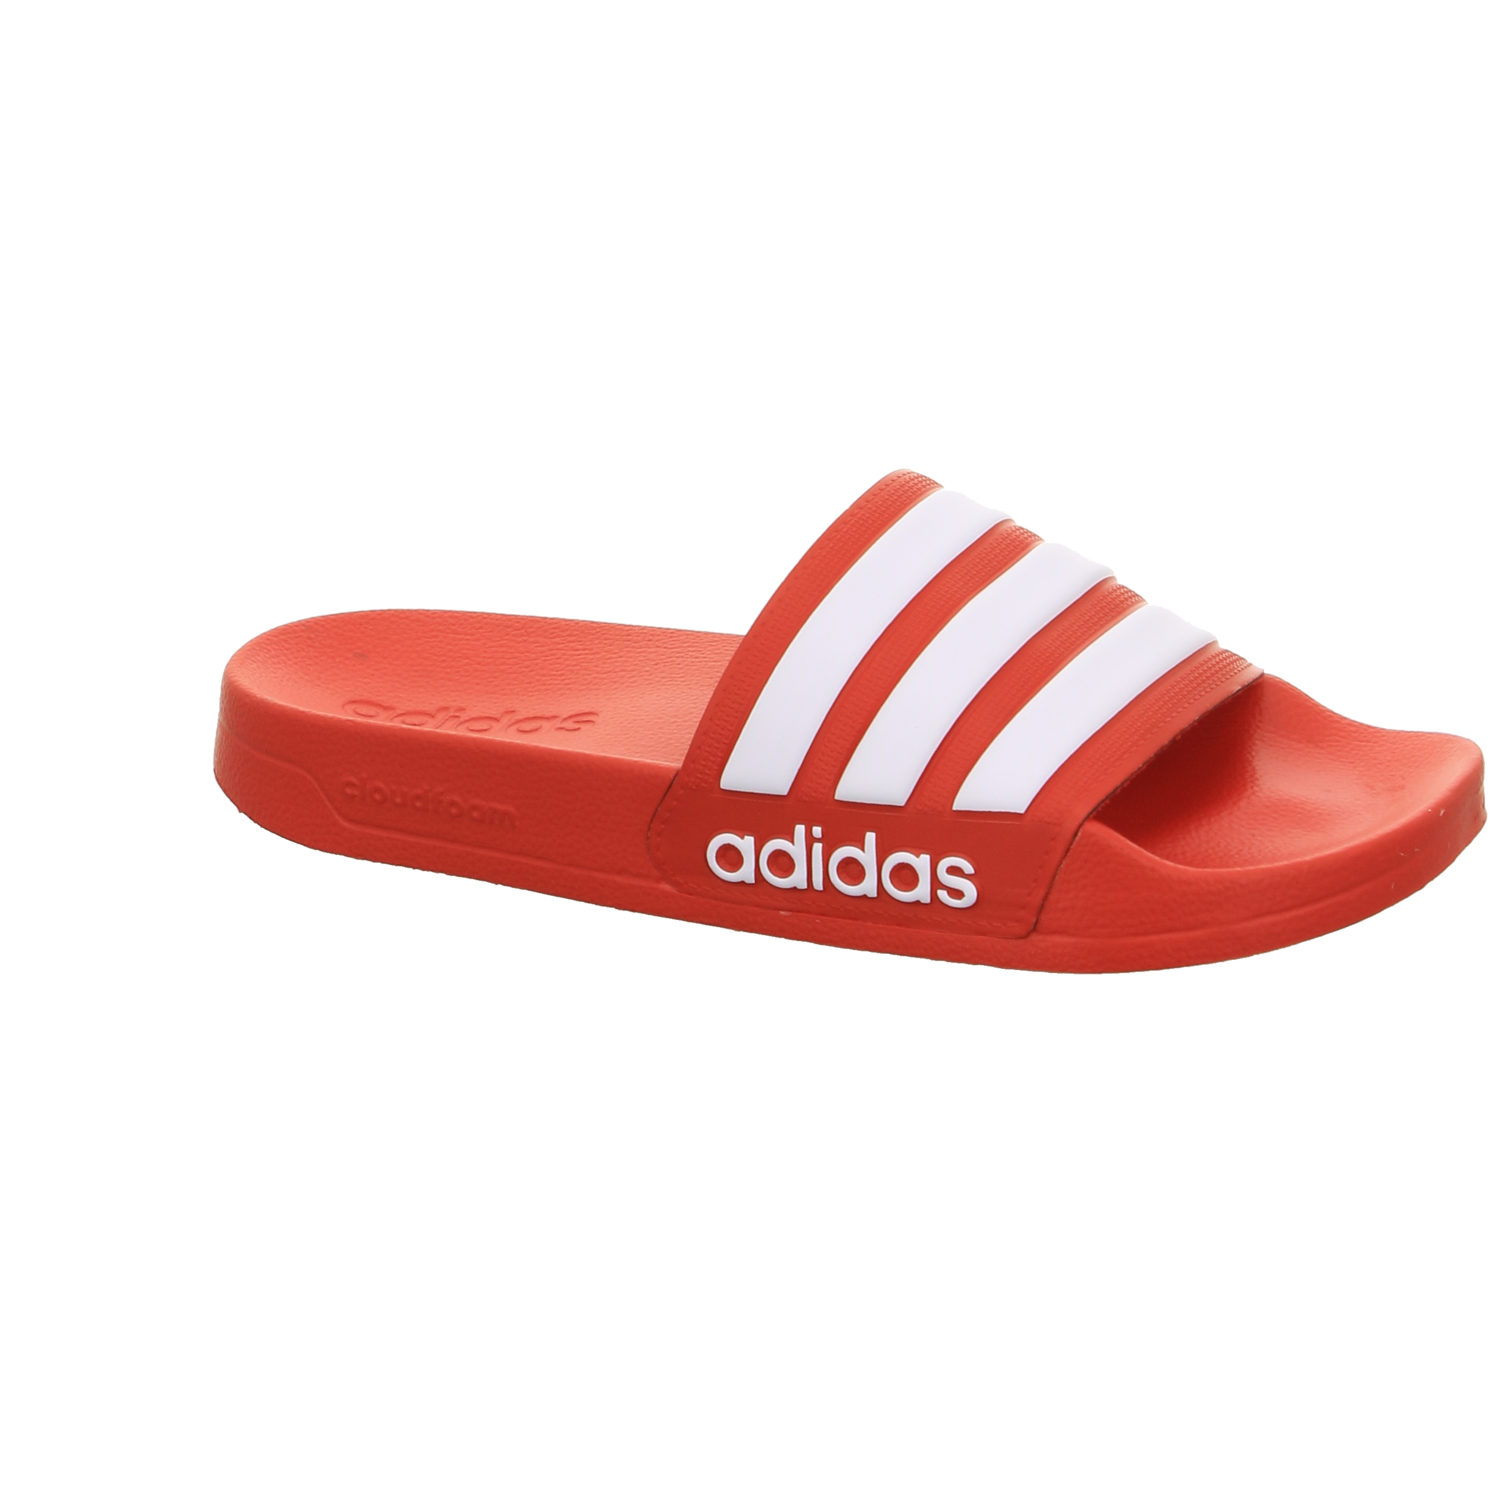 Adidas Casual-Pantolette rot